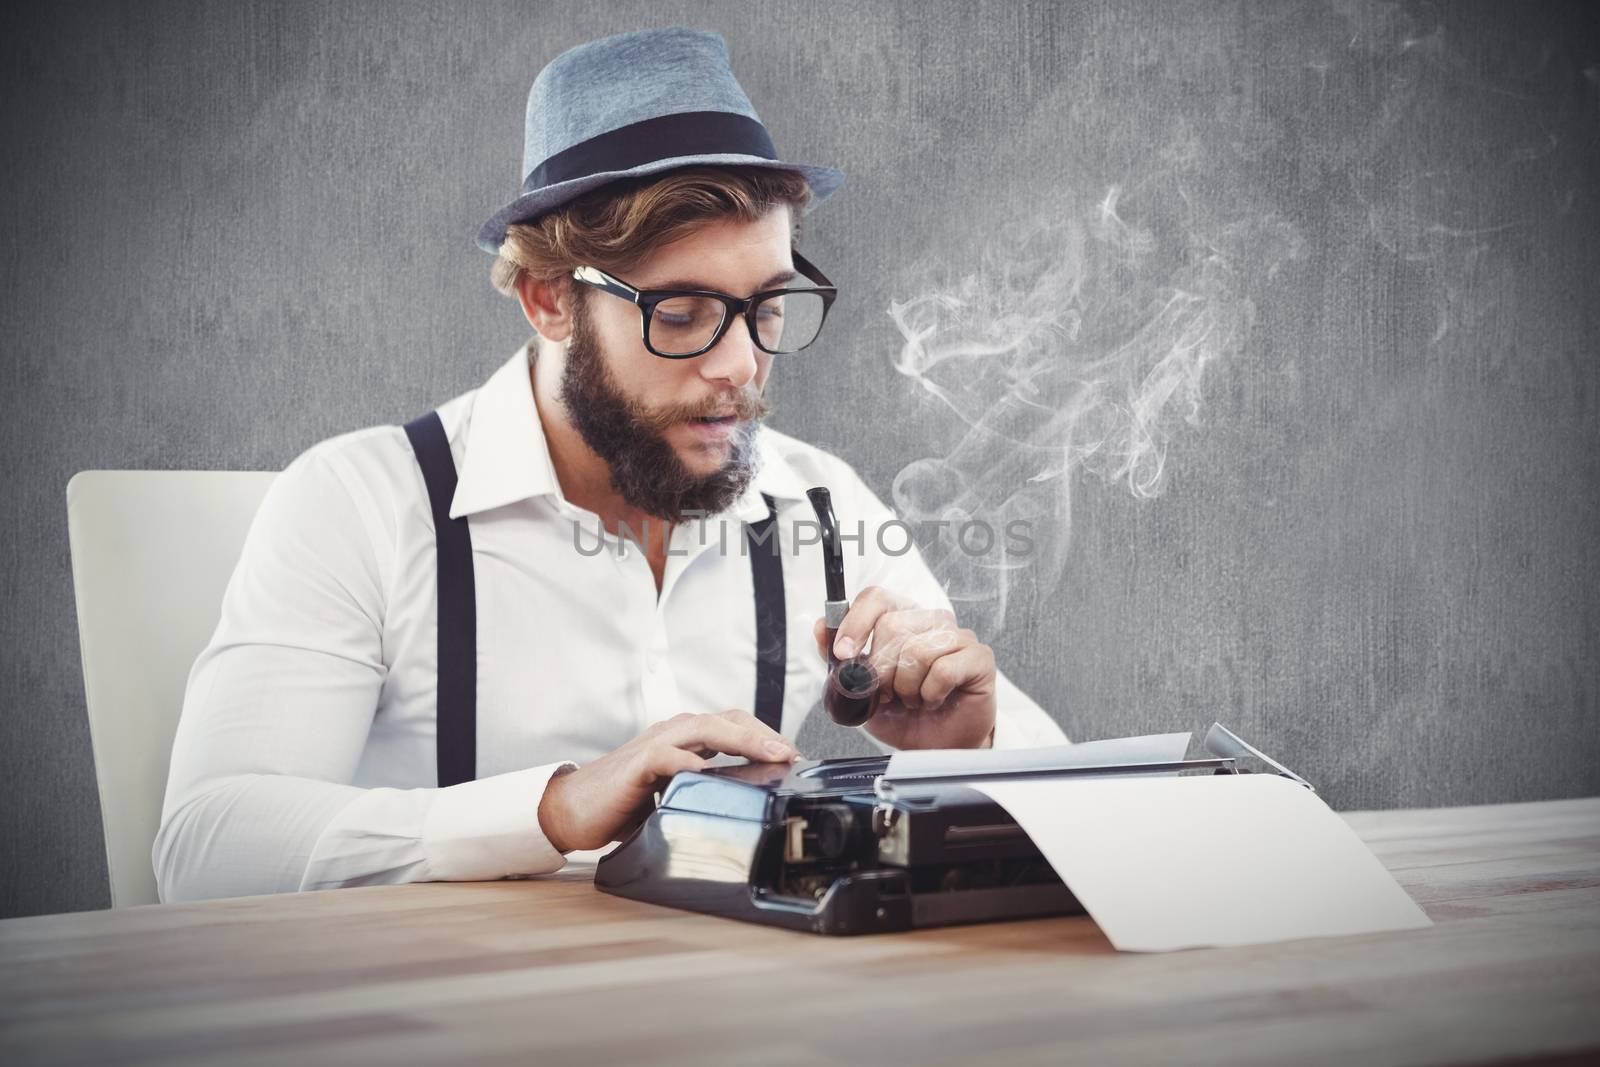 Hipster holding smoking pipe while working on typewriter against white and grey background